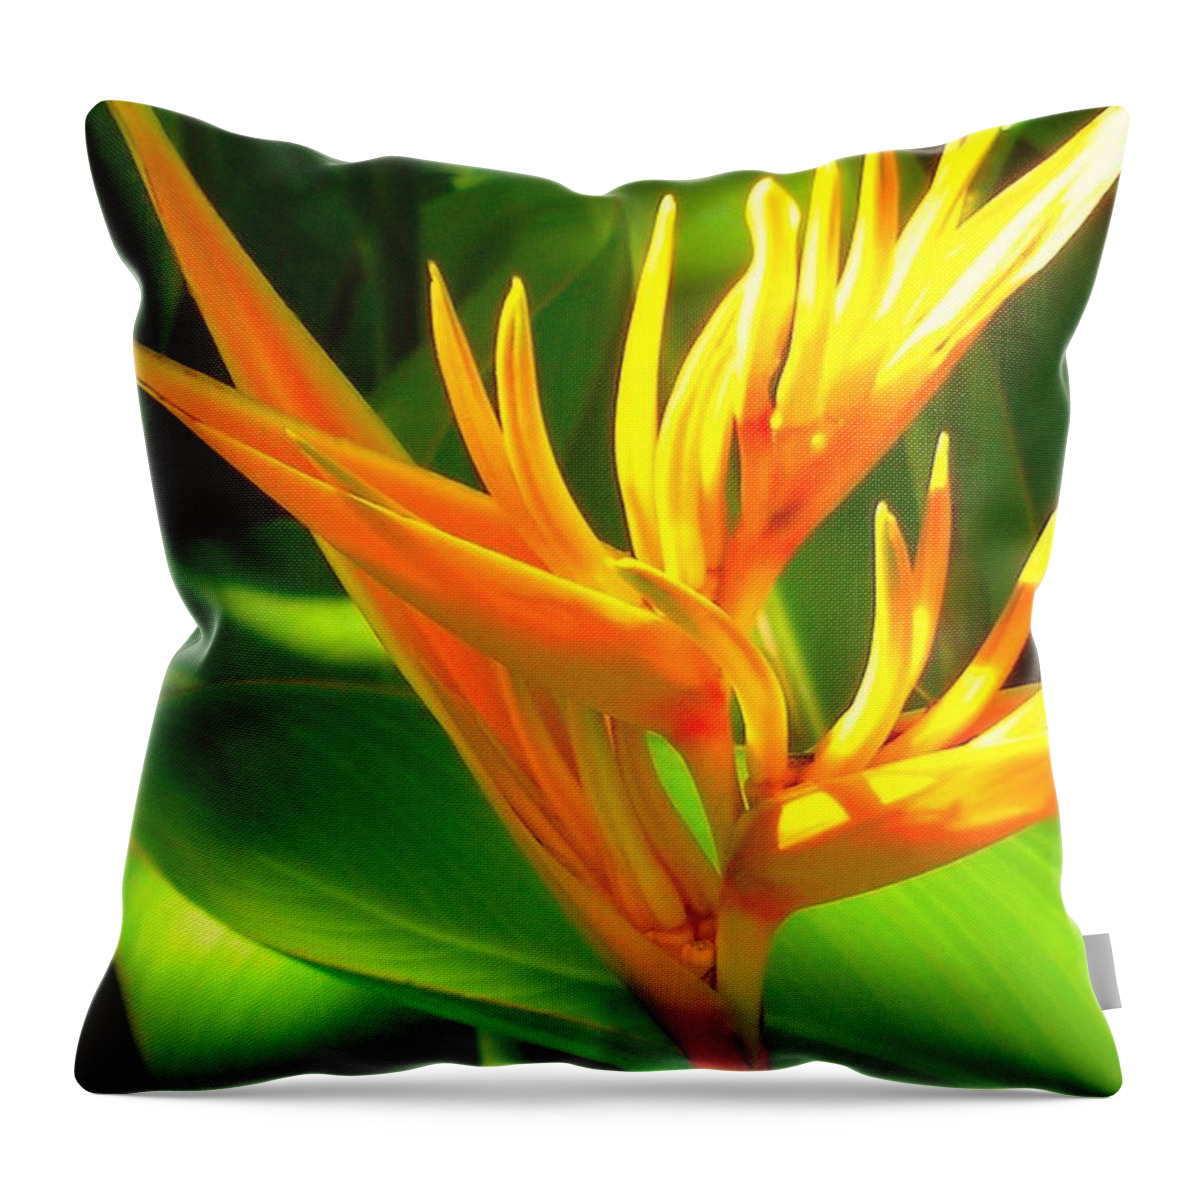 Heliconia Throw Pillow featuring the photograph You're My Light by James Temple